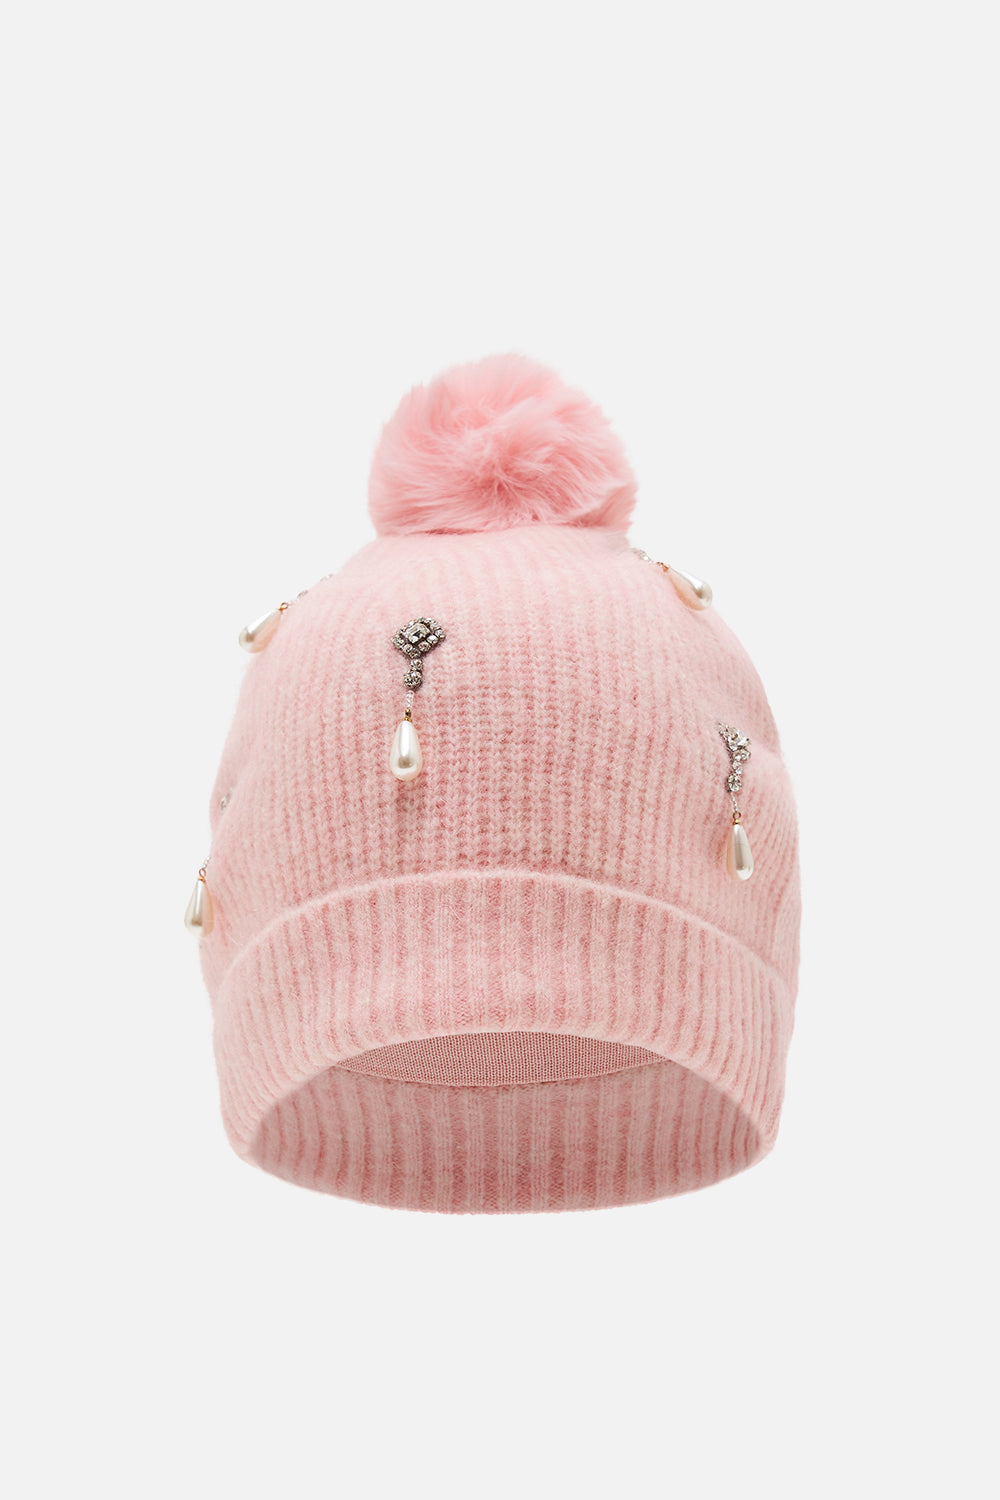 EMBELLISHED BEANIE SOLID PINK